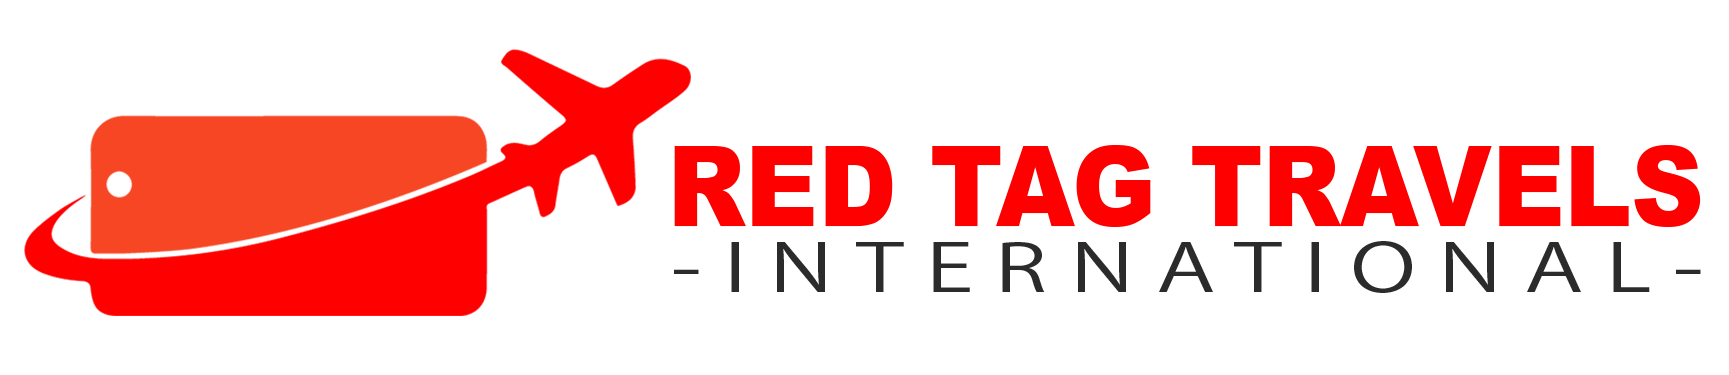 Red Travel Logo - Red Tag Travels - Your Travel Business Buddy